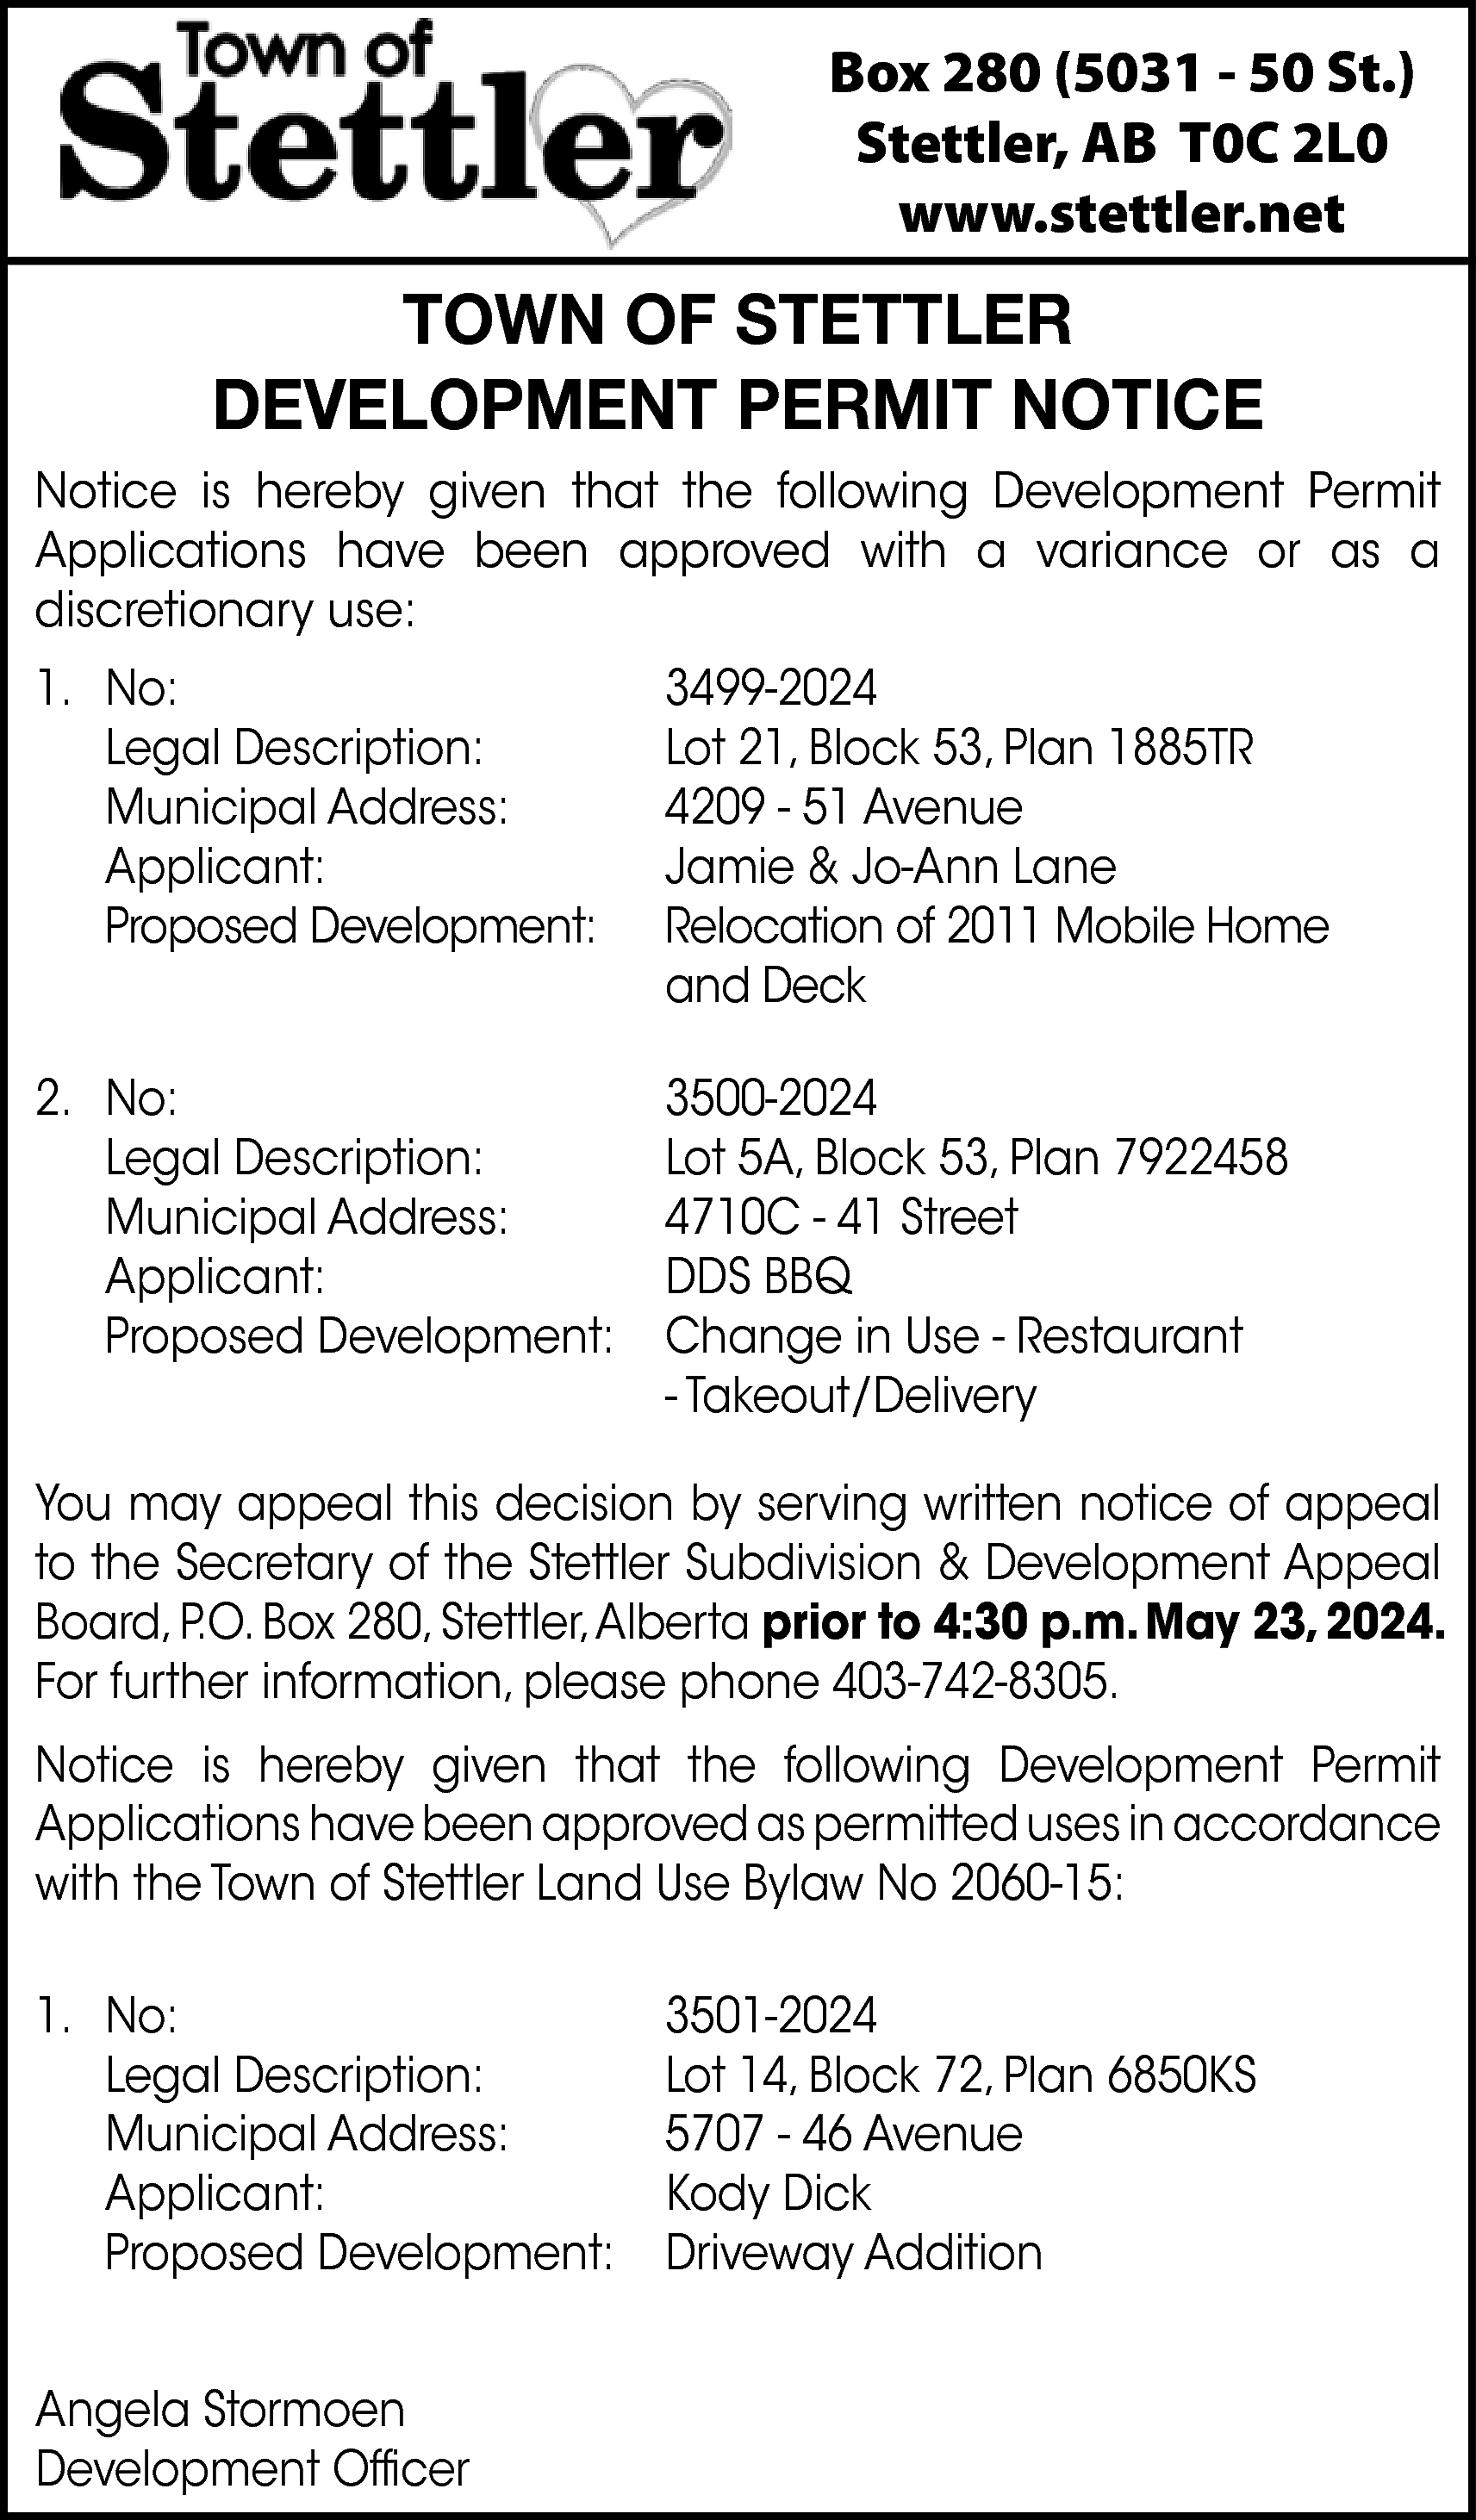 Box 280 (5031 - 50  Box 280 (5031 - 50 St.)  Stettler, AB T0C 2L0  www.stettler.net    TOWN OF STETTLER  DEVELOPMENT PERMIT NOTICE  Notice is hereby given that the following Development Permit  Applications have been approved with a variance or as a  discretionary use:  1. No:  Legal Description:  Municipal Address:  Applicant:  Proposed Development:    3499-2024  Lot 21, Block 53, Plan 1885TR  4209 - 51 Avenue  Jamie & Jo-Ann Lane  Relocation of 2011 Mobile Home  and Deck    2. No:  Legal Description:  Municipal Address:  Applicant:  Proposed Development:    3500-2024  Lot 5A, Block 53, Plan 7922458  4710C - 41 Street  DDS BBQ  Change in Use - Restaurant  - Takeout/Delivery    You may appeal this decision by serving written notice of appeal  to the Secretary of the Stettler Subdivision & Development Appeal  Board, P.O. Box 280, Stettler,Alberta prior to 4:30 p.m. May 23, 2024.  For further information, please phone 403-742-8305.  Notice is hereby given that the following Development Permit  Applications have been approved as permitted uses in accordance  with the Town of Stettler Land Use Bylaw No 2060-15:  1. No:  Legal Description:  Municipal Address:  Applicant:  Proposed Development:  Angela Stormoen  Development Officer    3501-2024  Lot 14, Block 72, Plan 6850KS  5707 - 46 Avenue  Kody Dick  Driveway Addition    